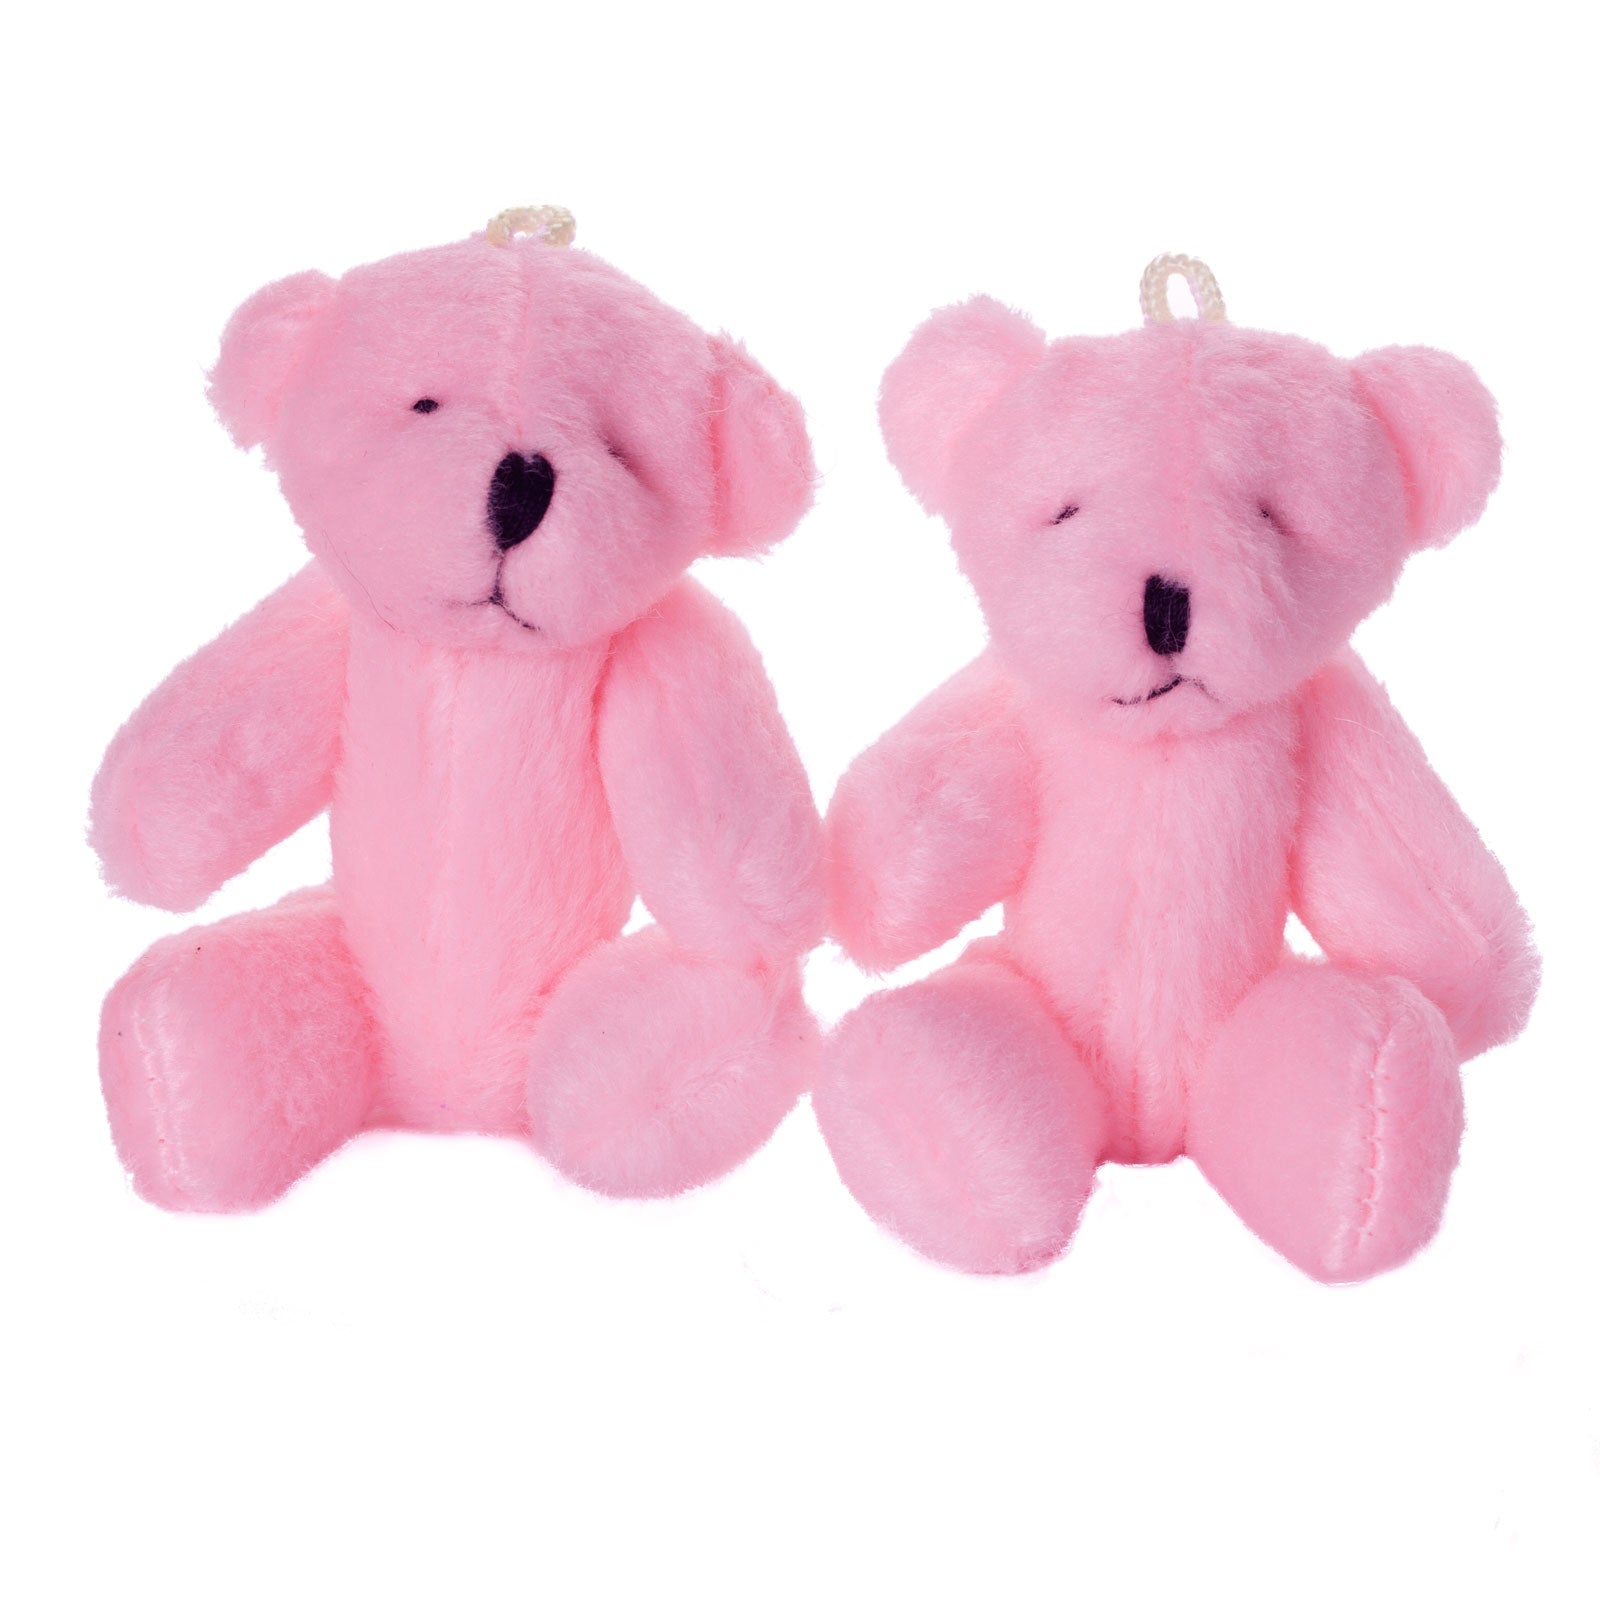 Small PINK Teddy Bears X 80 - Cute Soft Adorable